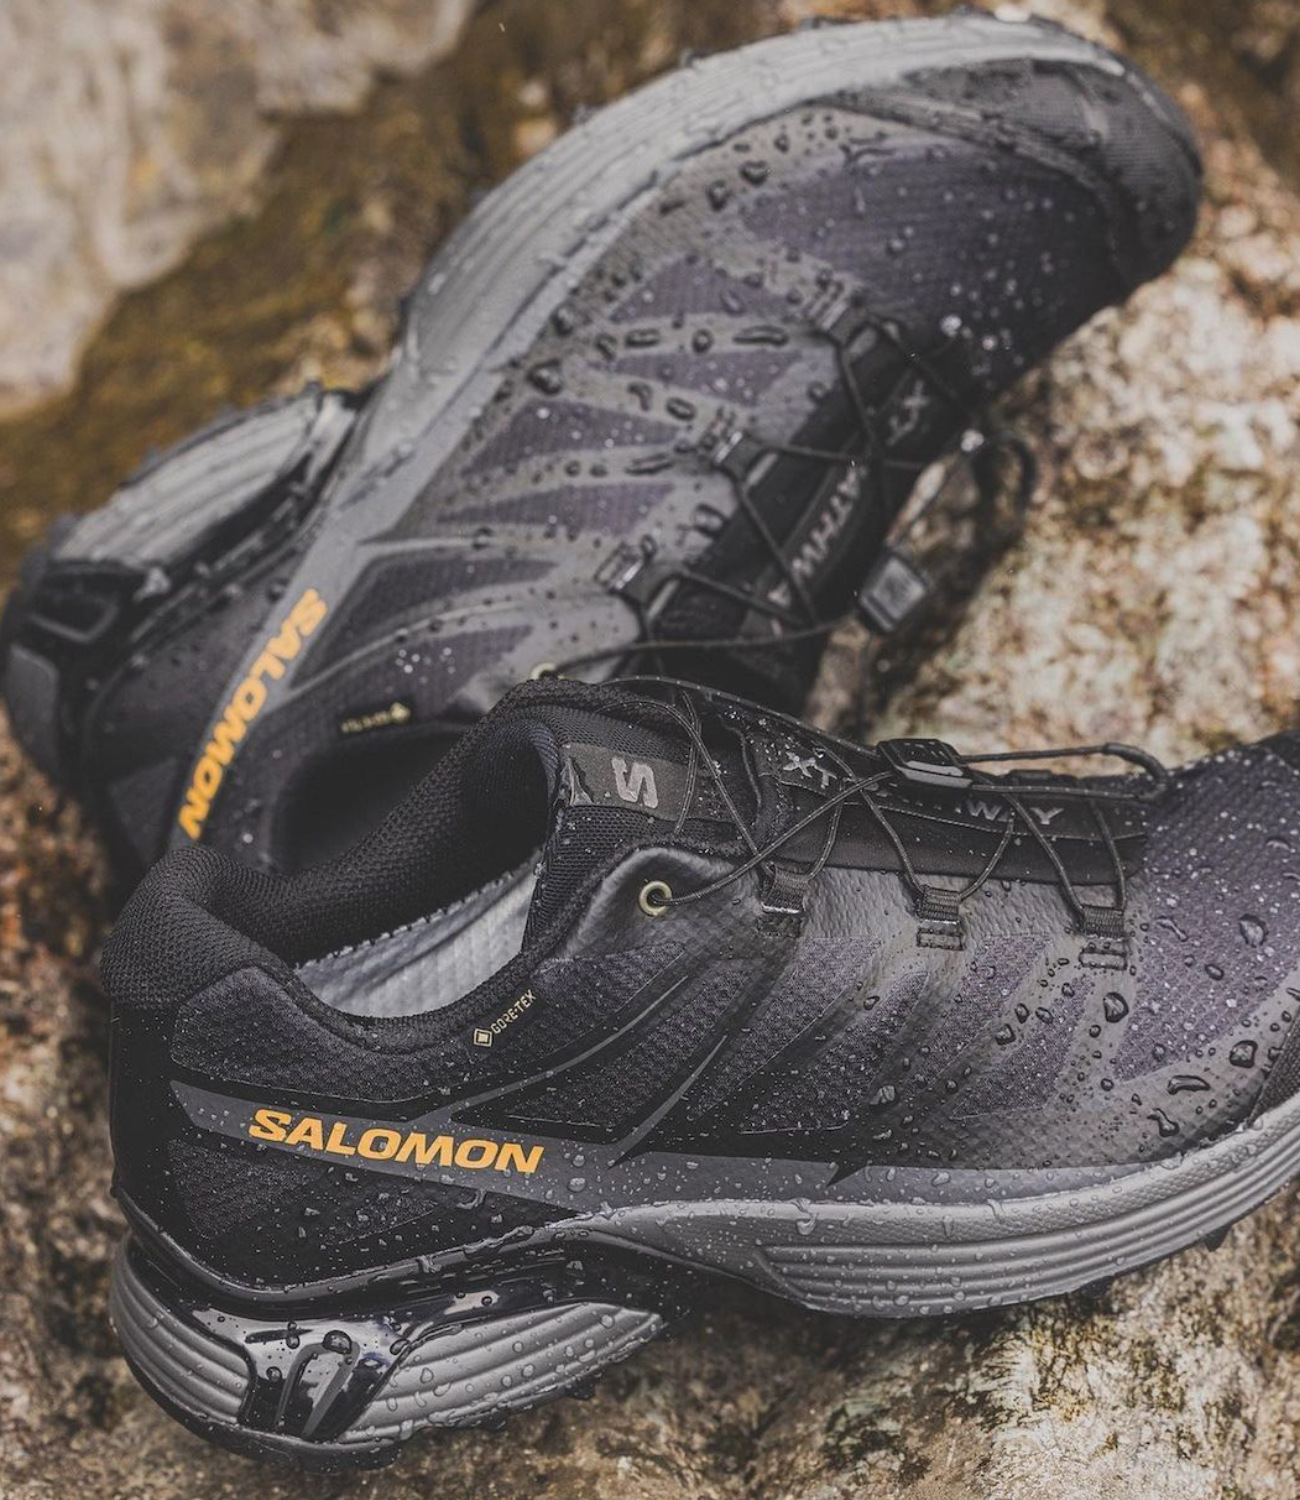 Salomon's XT-PATHWAY sneaker has been given a makeover exclusively for BEAMS.